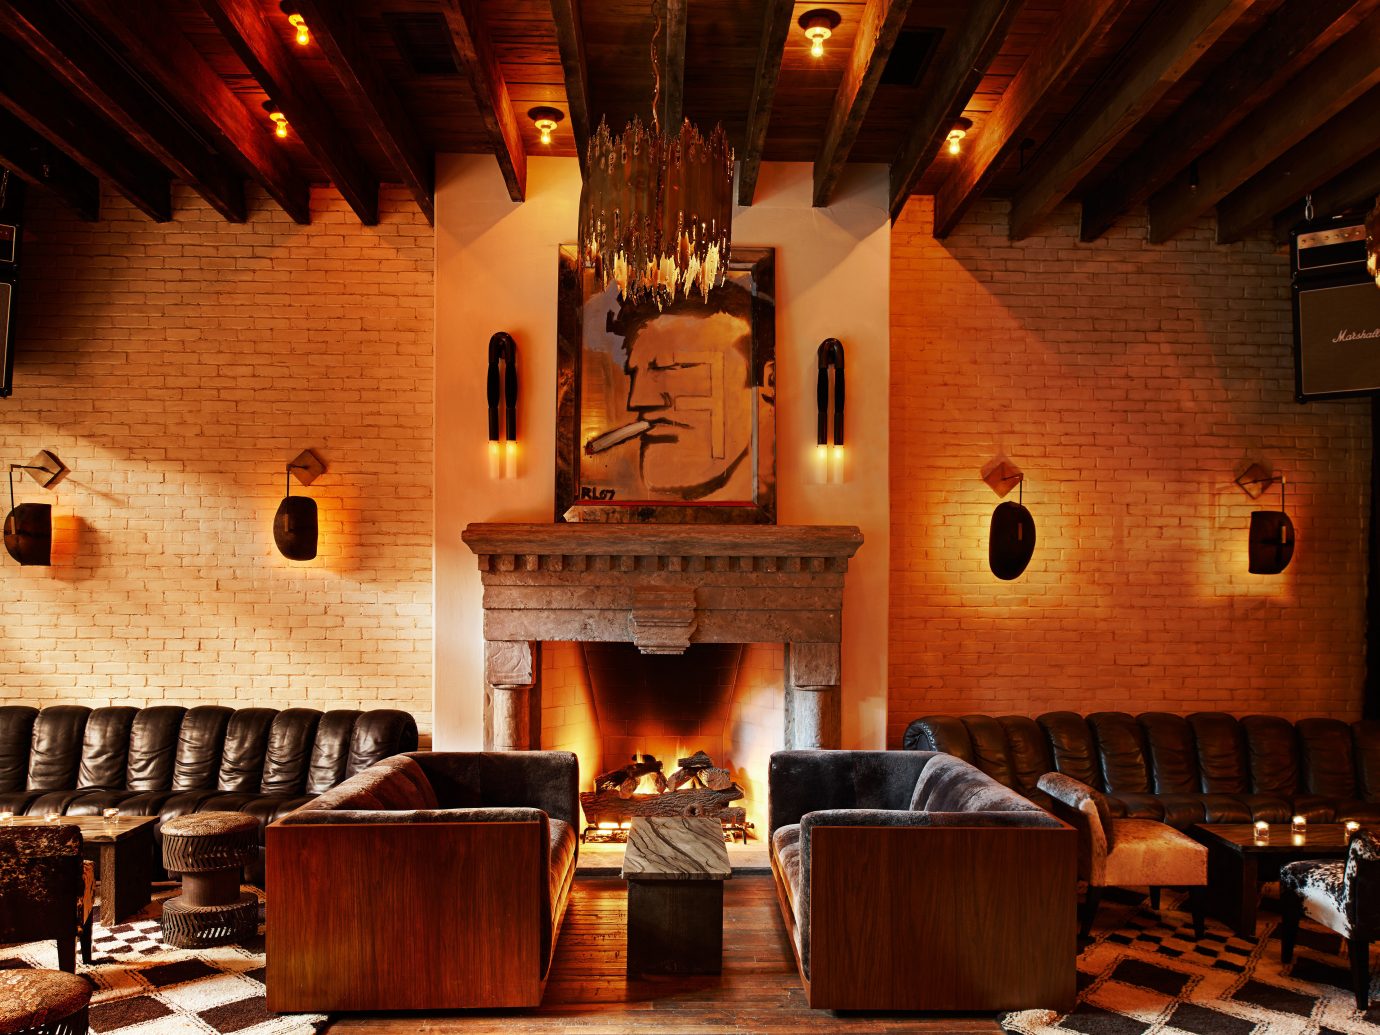 Boutique City Fireplace Hotels Lobby Lounge Modern Style + Design indoor wall man made object room ceiling Living restaurant furniture area